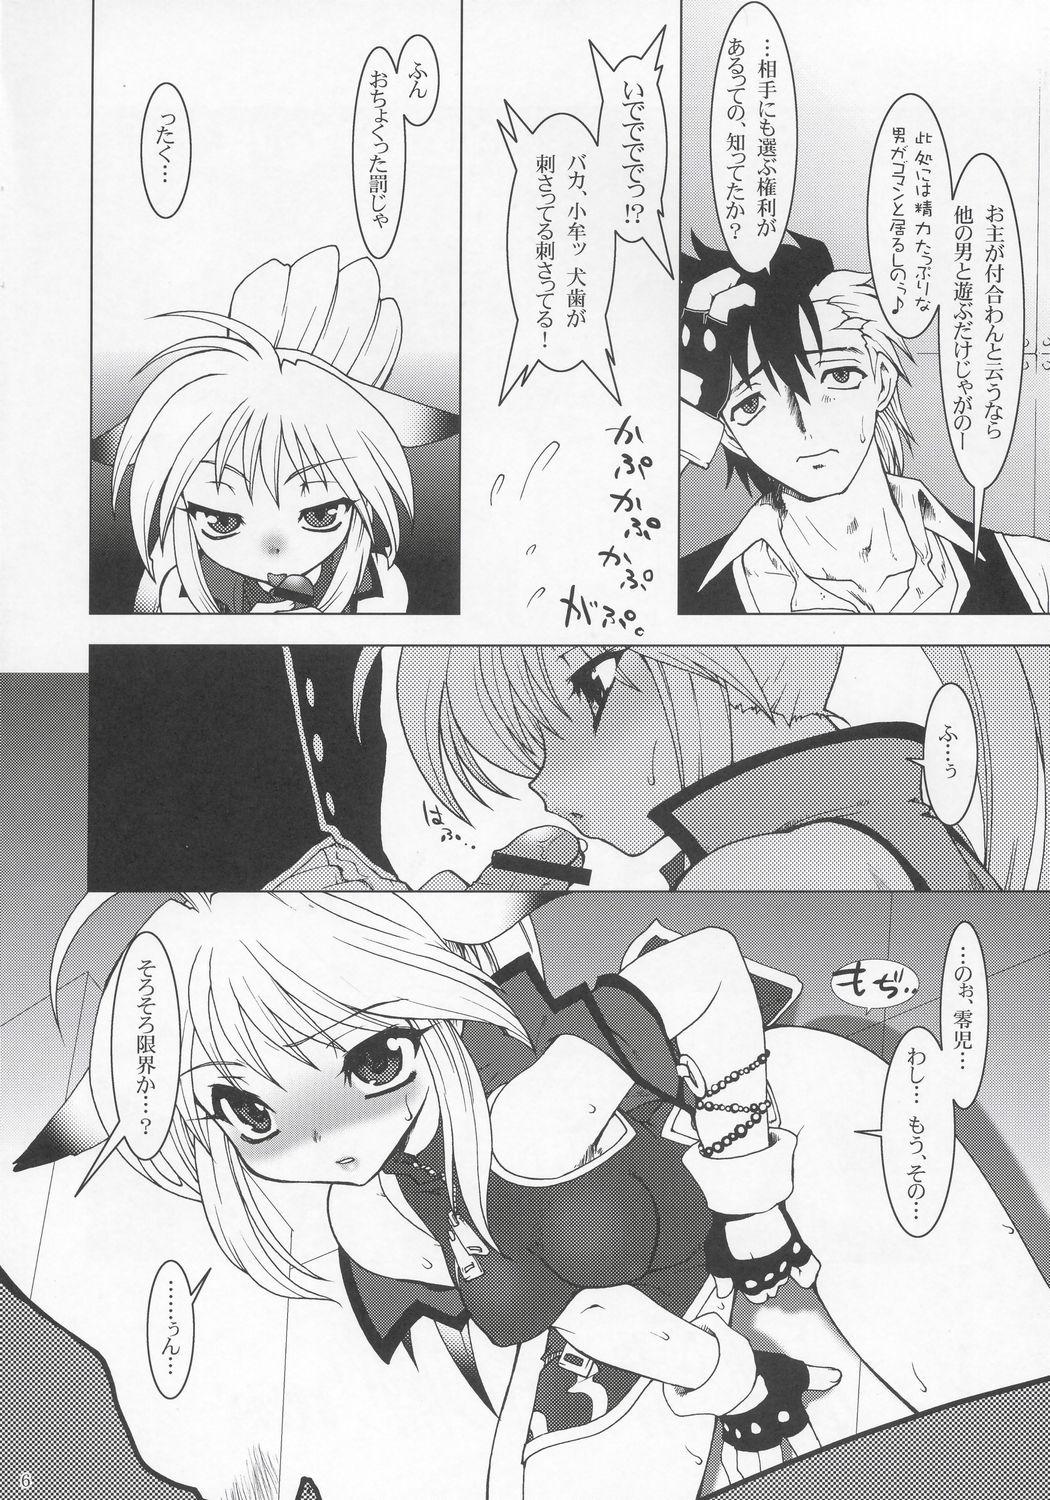 Oral NxC - Endless frontier Valkyrie no bouken Sex Pussy - Page 5